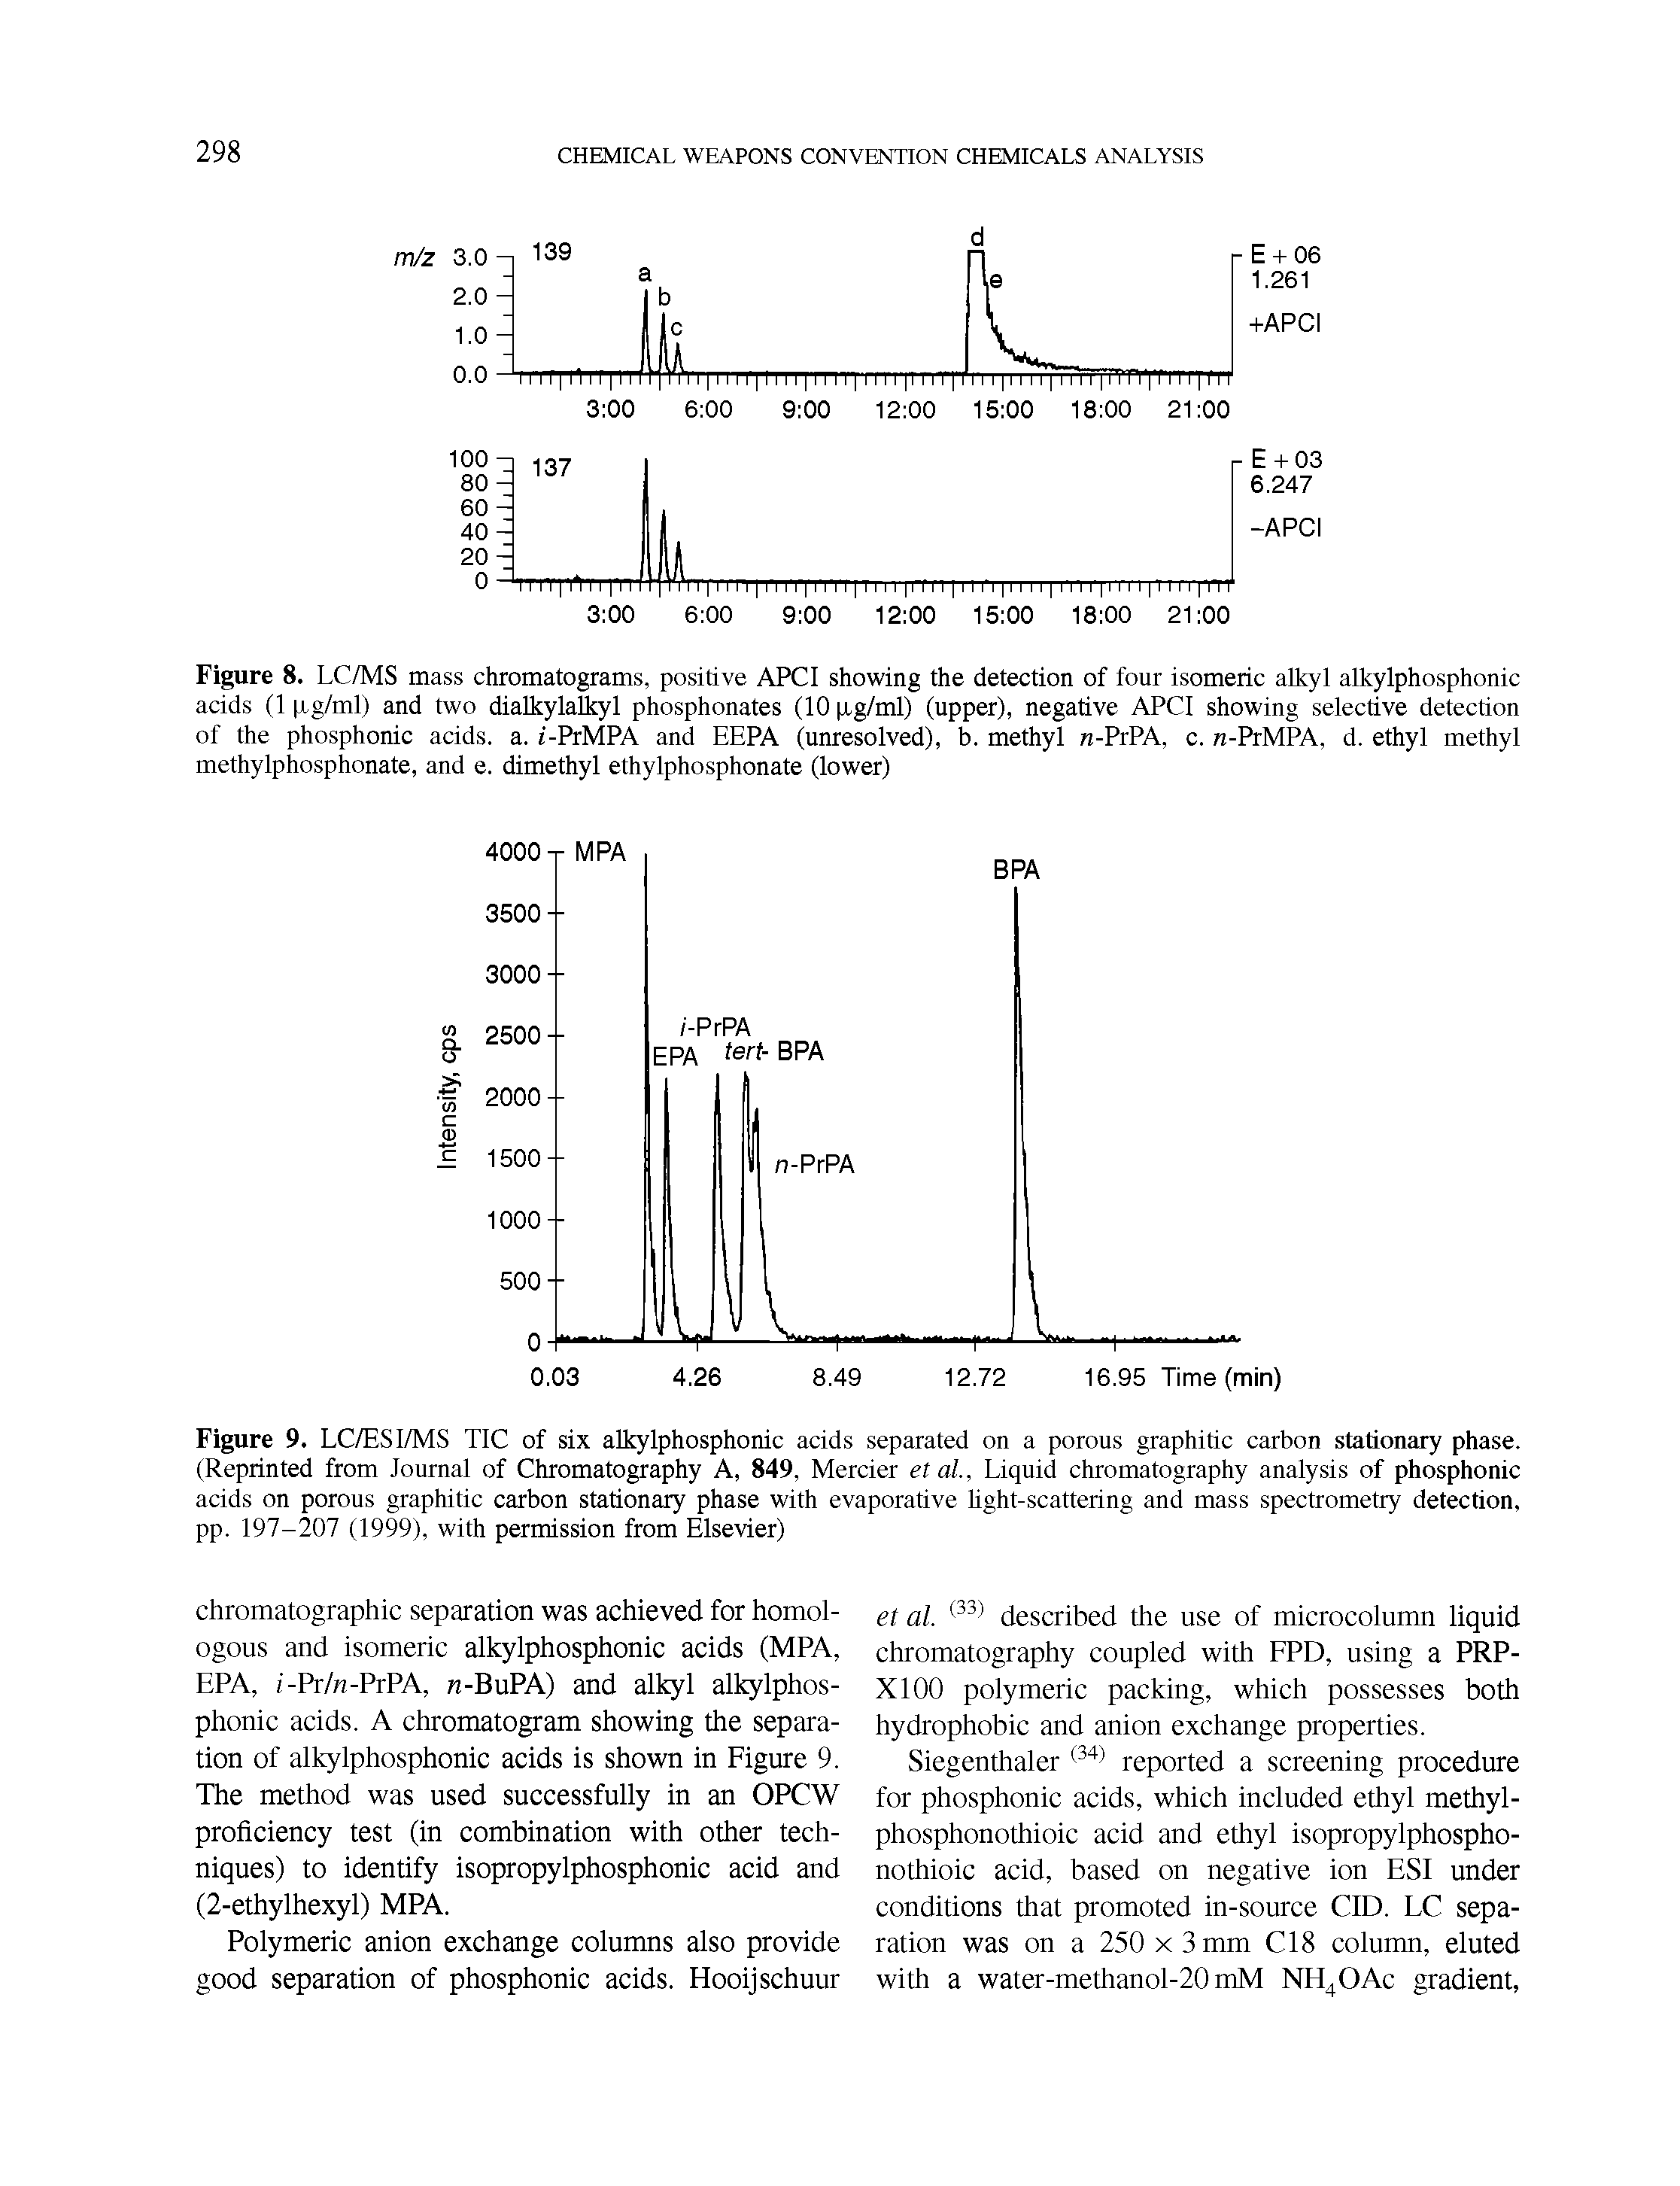 Figure 8. LC/MS mass chromatograms, positive APCI showing the detection of four isomeric alkyl alkylphosphonic acids (1 Hg/ml) and two dialkylalkyl phosphonates (10 p,g/ml) (upper), negative APCI showing selective detection of the phosphonic acids, a. i-PrMPA and EEPA (unresolved), b. methyl n-PrPA, c. n-PrMPA, d. ethyl methyl methylphosphonate, and e. dimethyl ethylphosphonate (lower)...